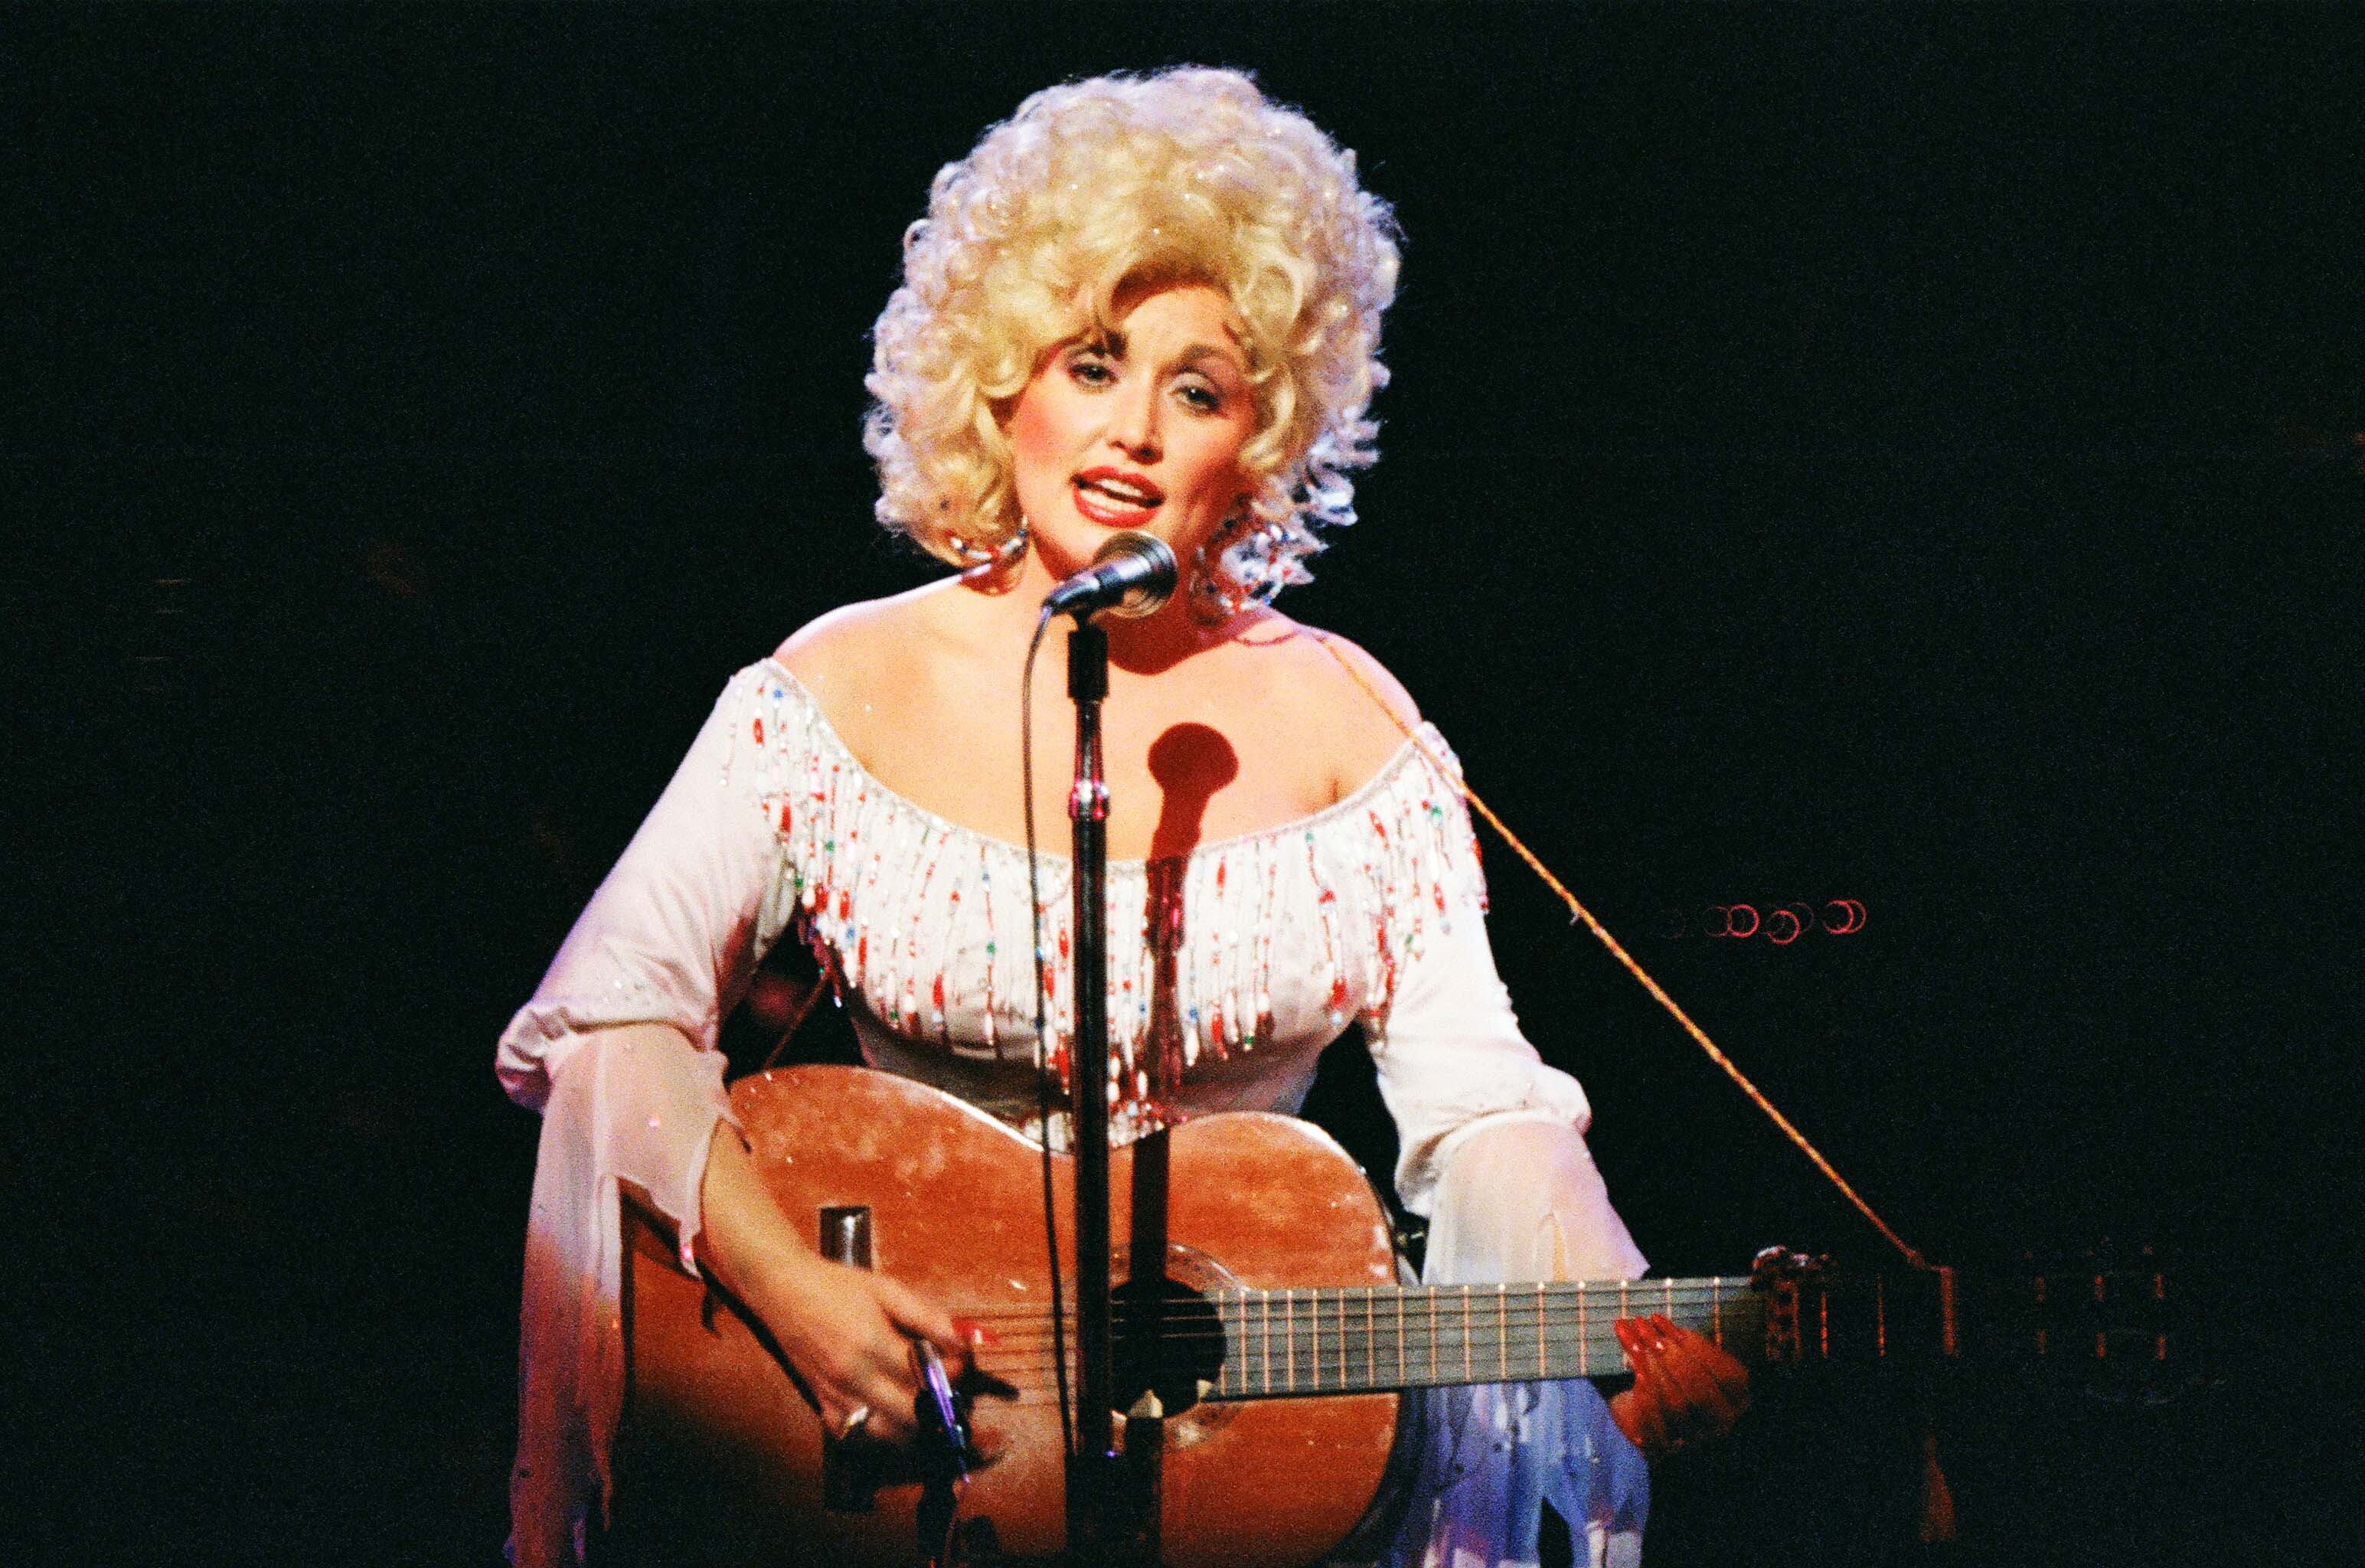 Dolly Parton performs at the Dominion Theatre in London.